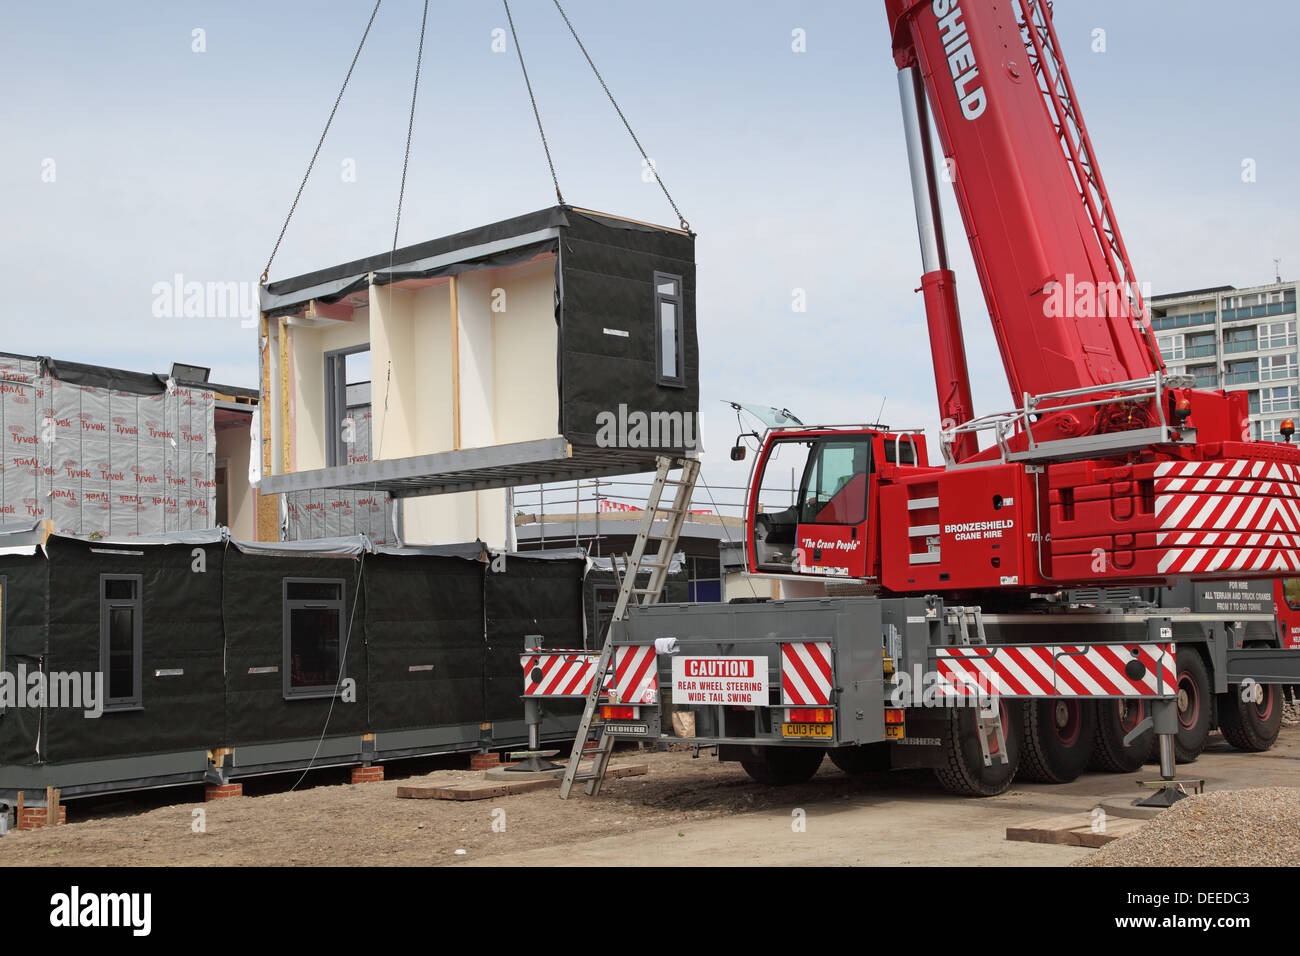 A crane lifts a modular section of a new school building into place in south London, UK Stock Photo